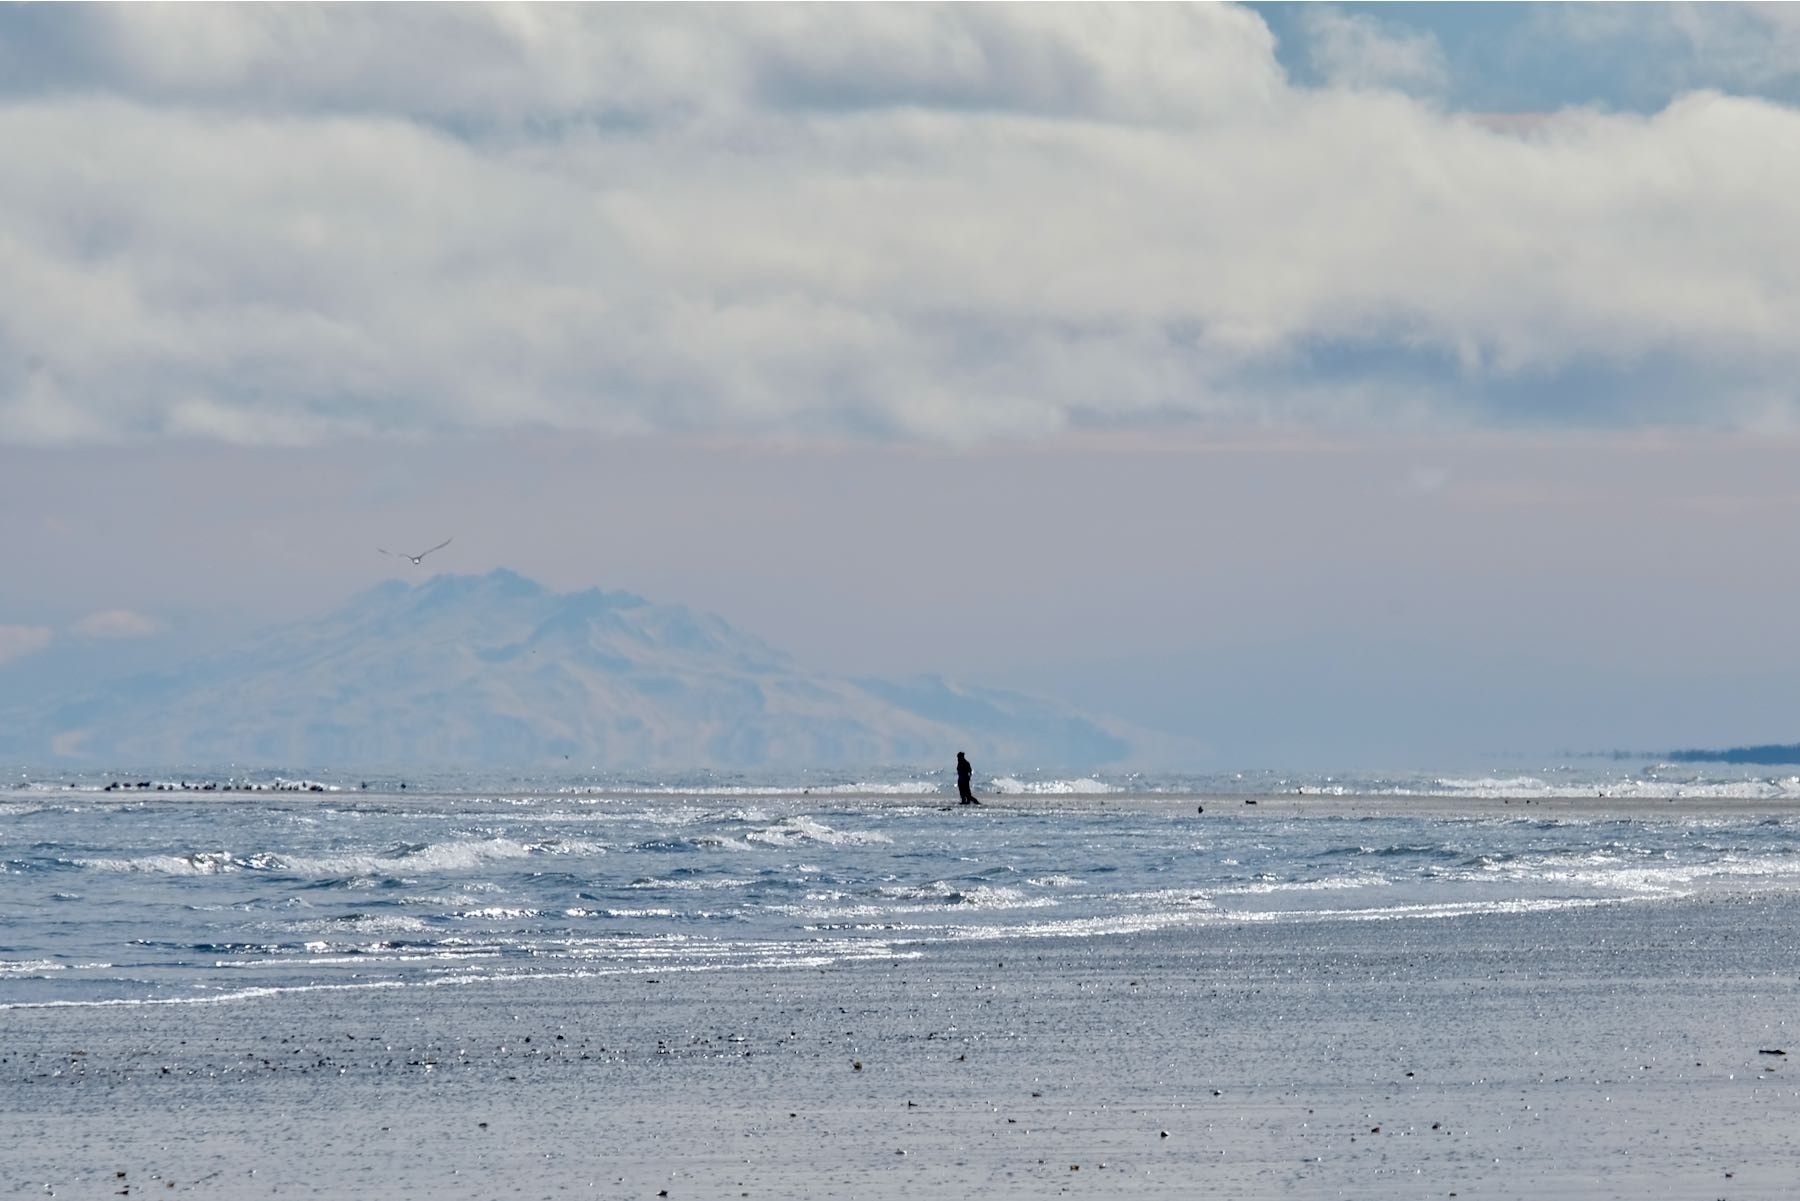 View across shallow sea to a person on the beach with a mountain in the distance and a bird flying nearby. 